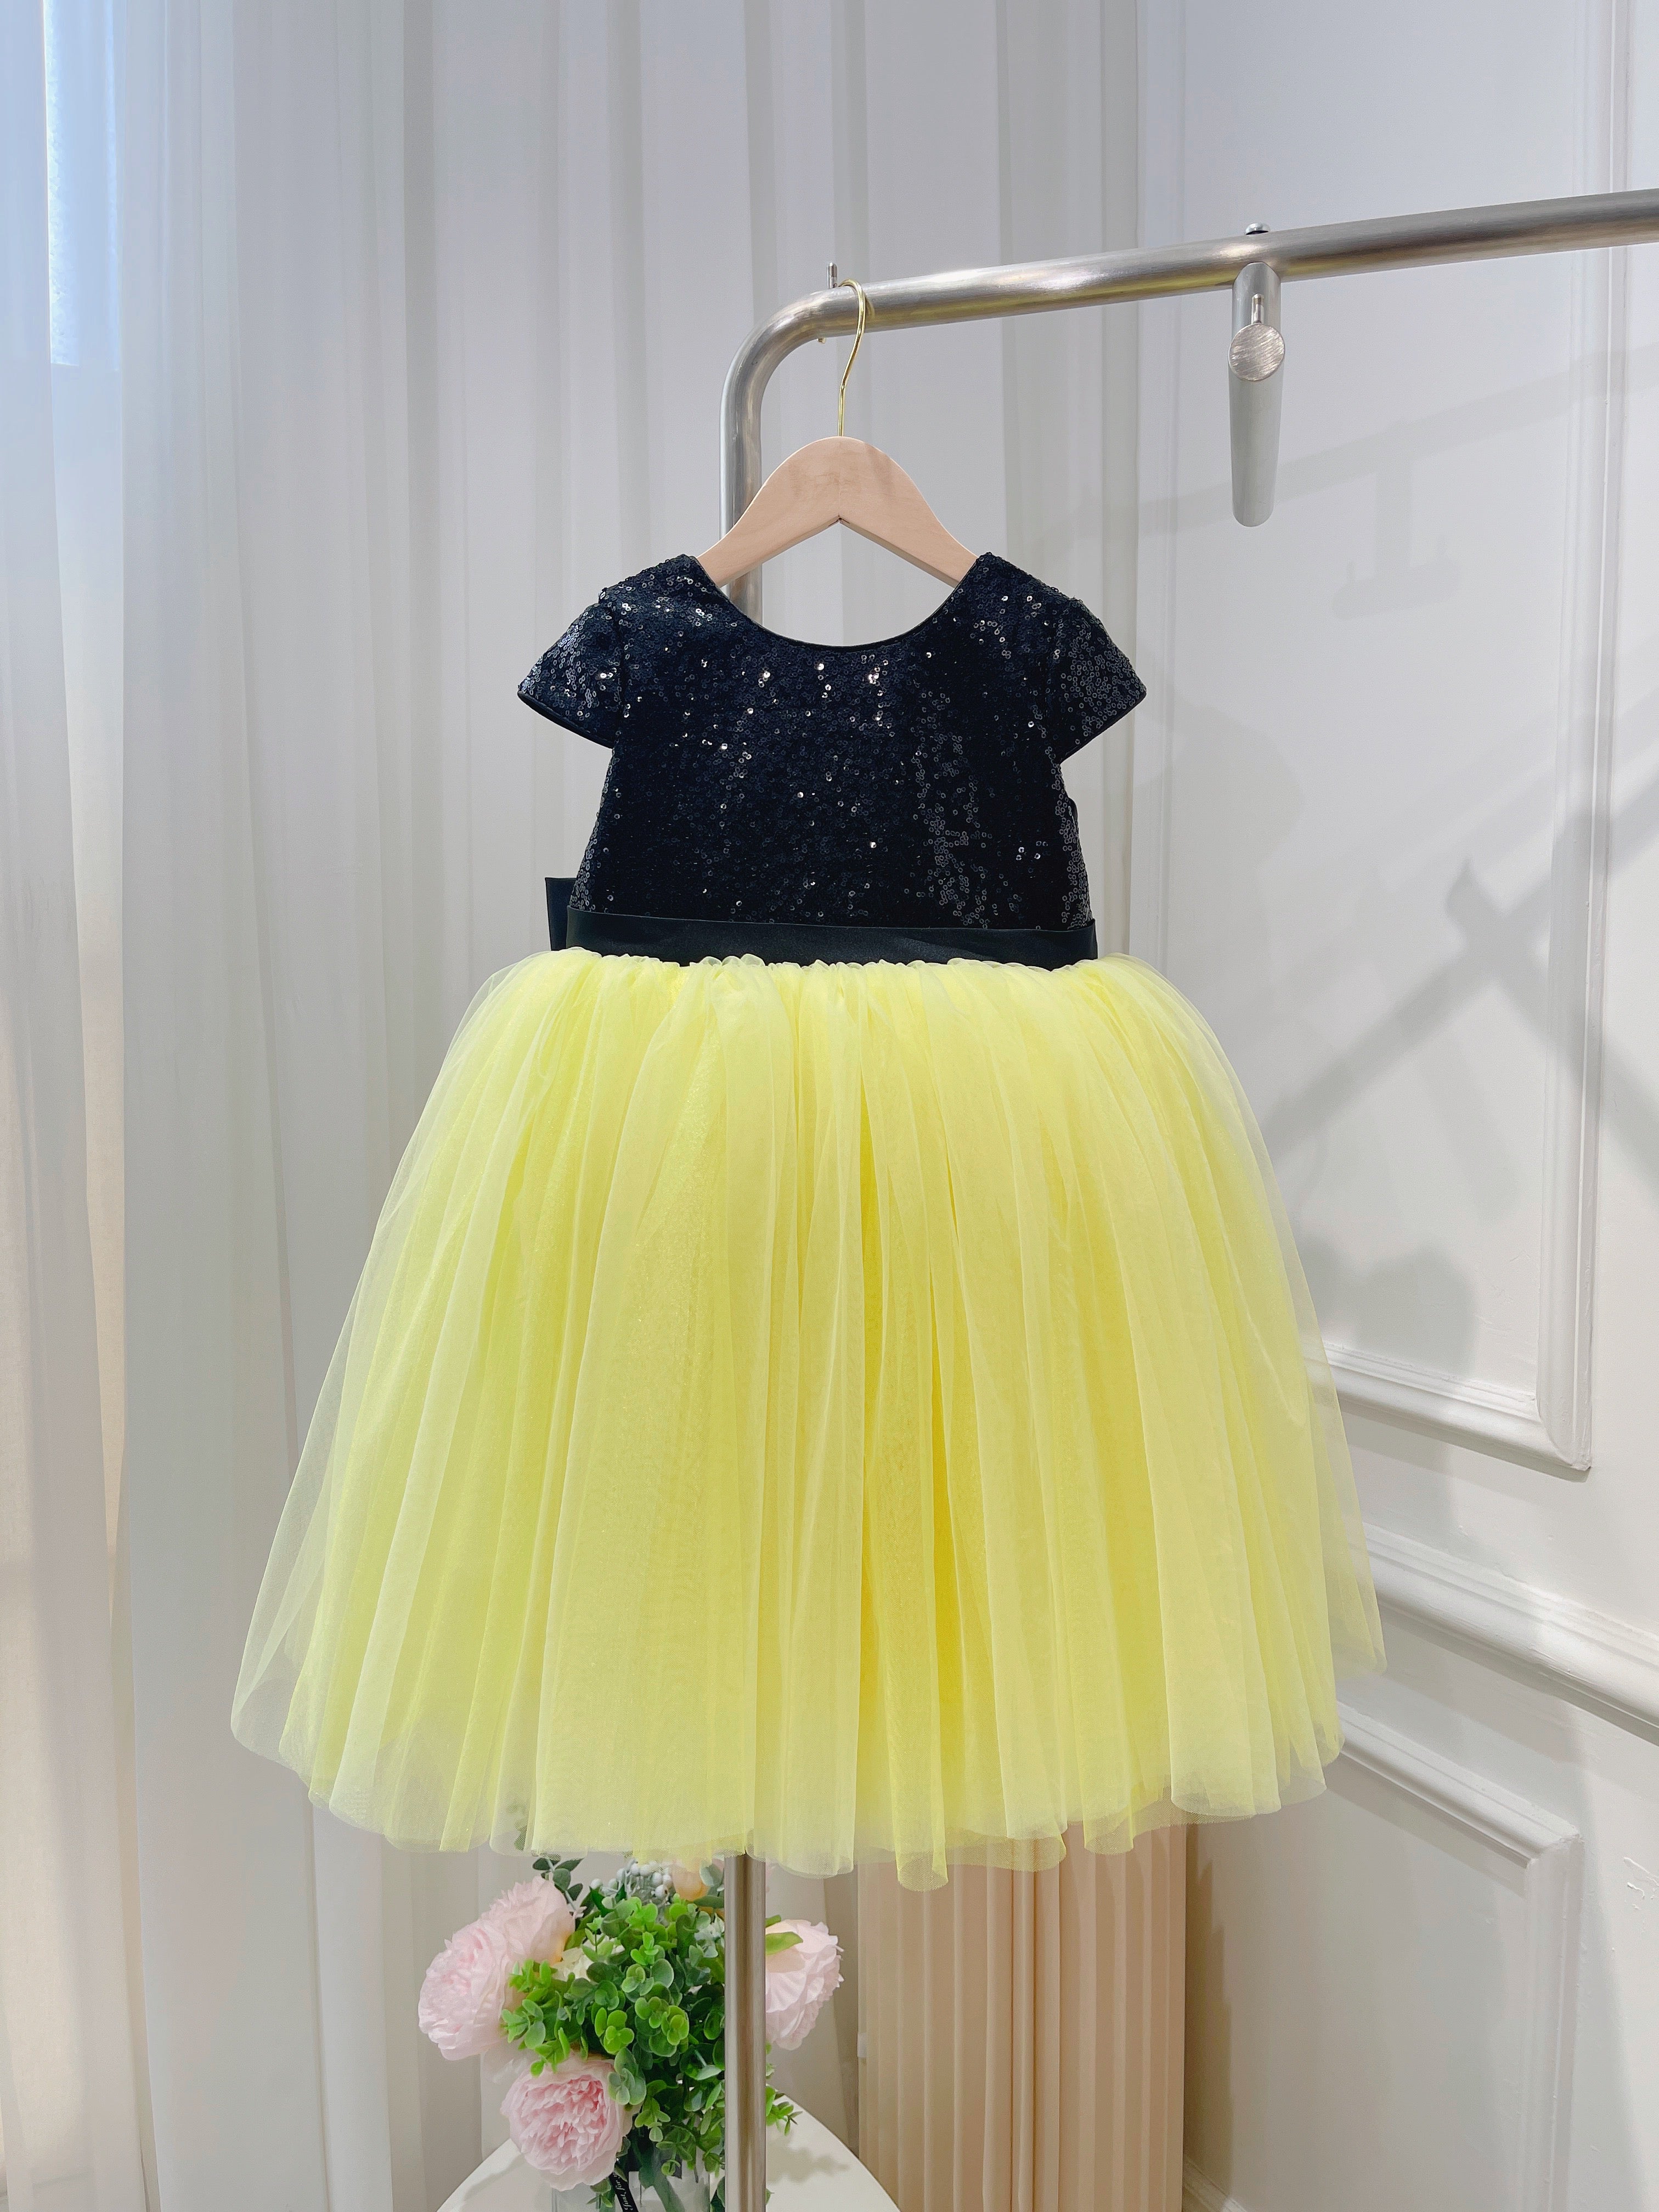 The top black and the bottom yellow dress skirt